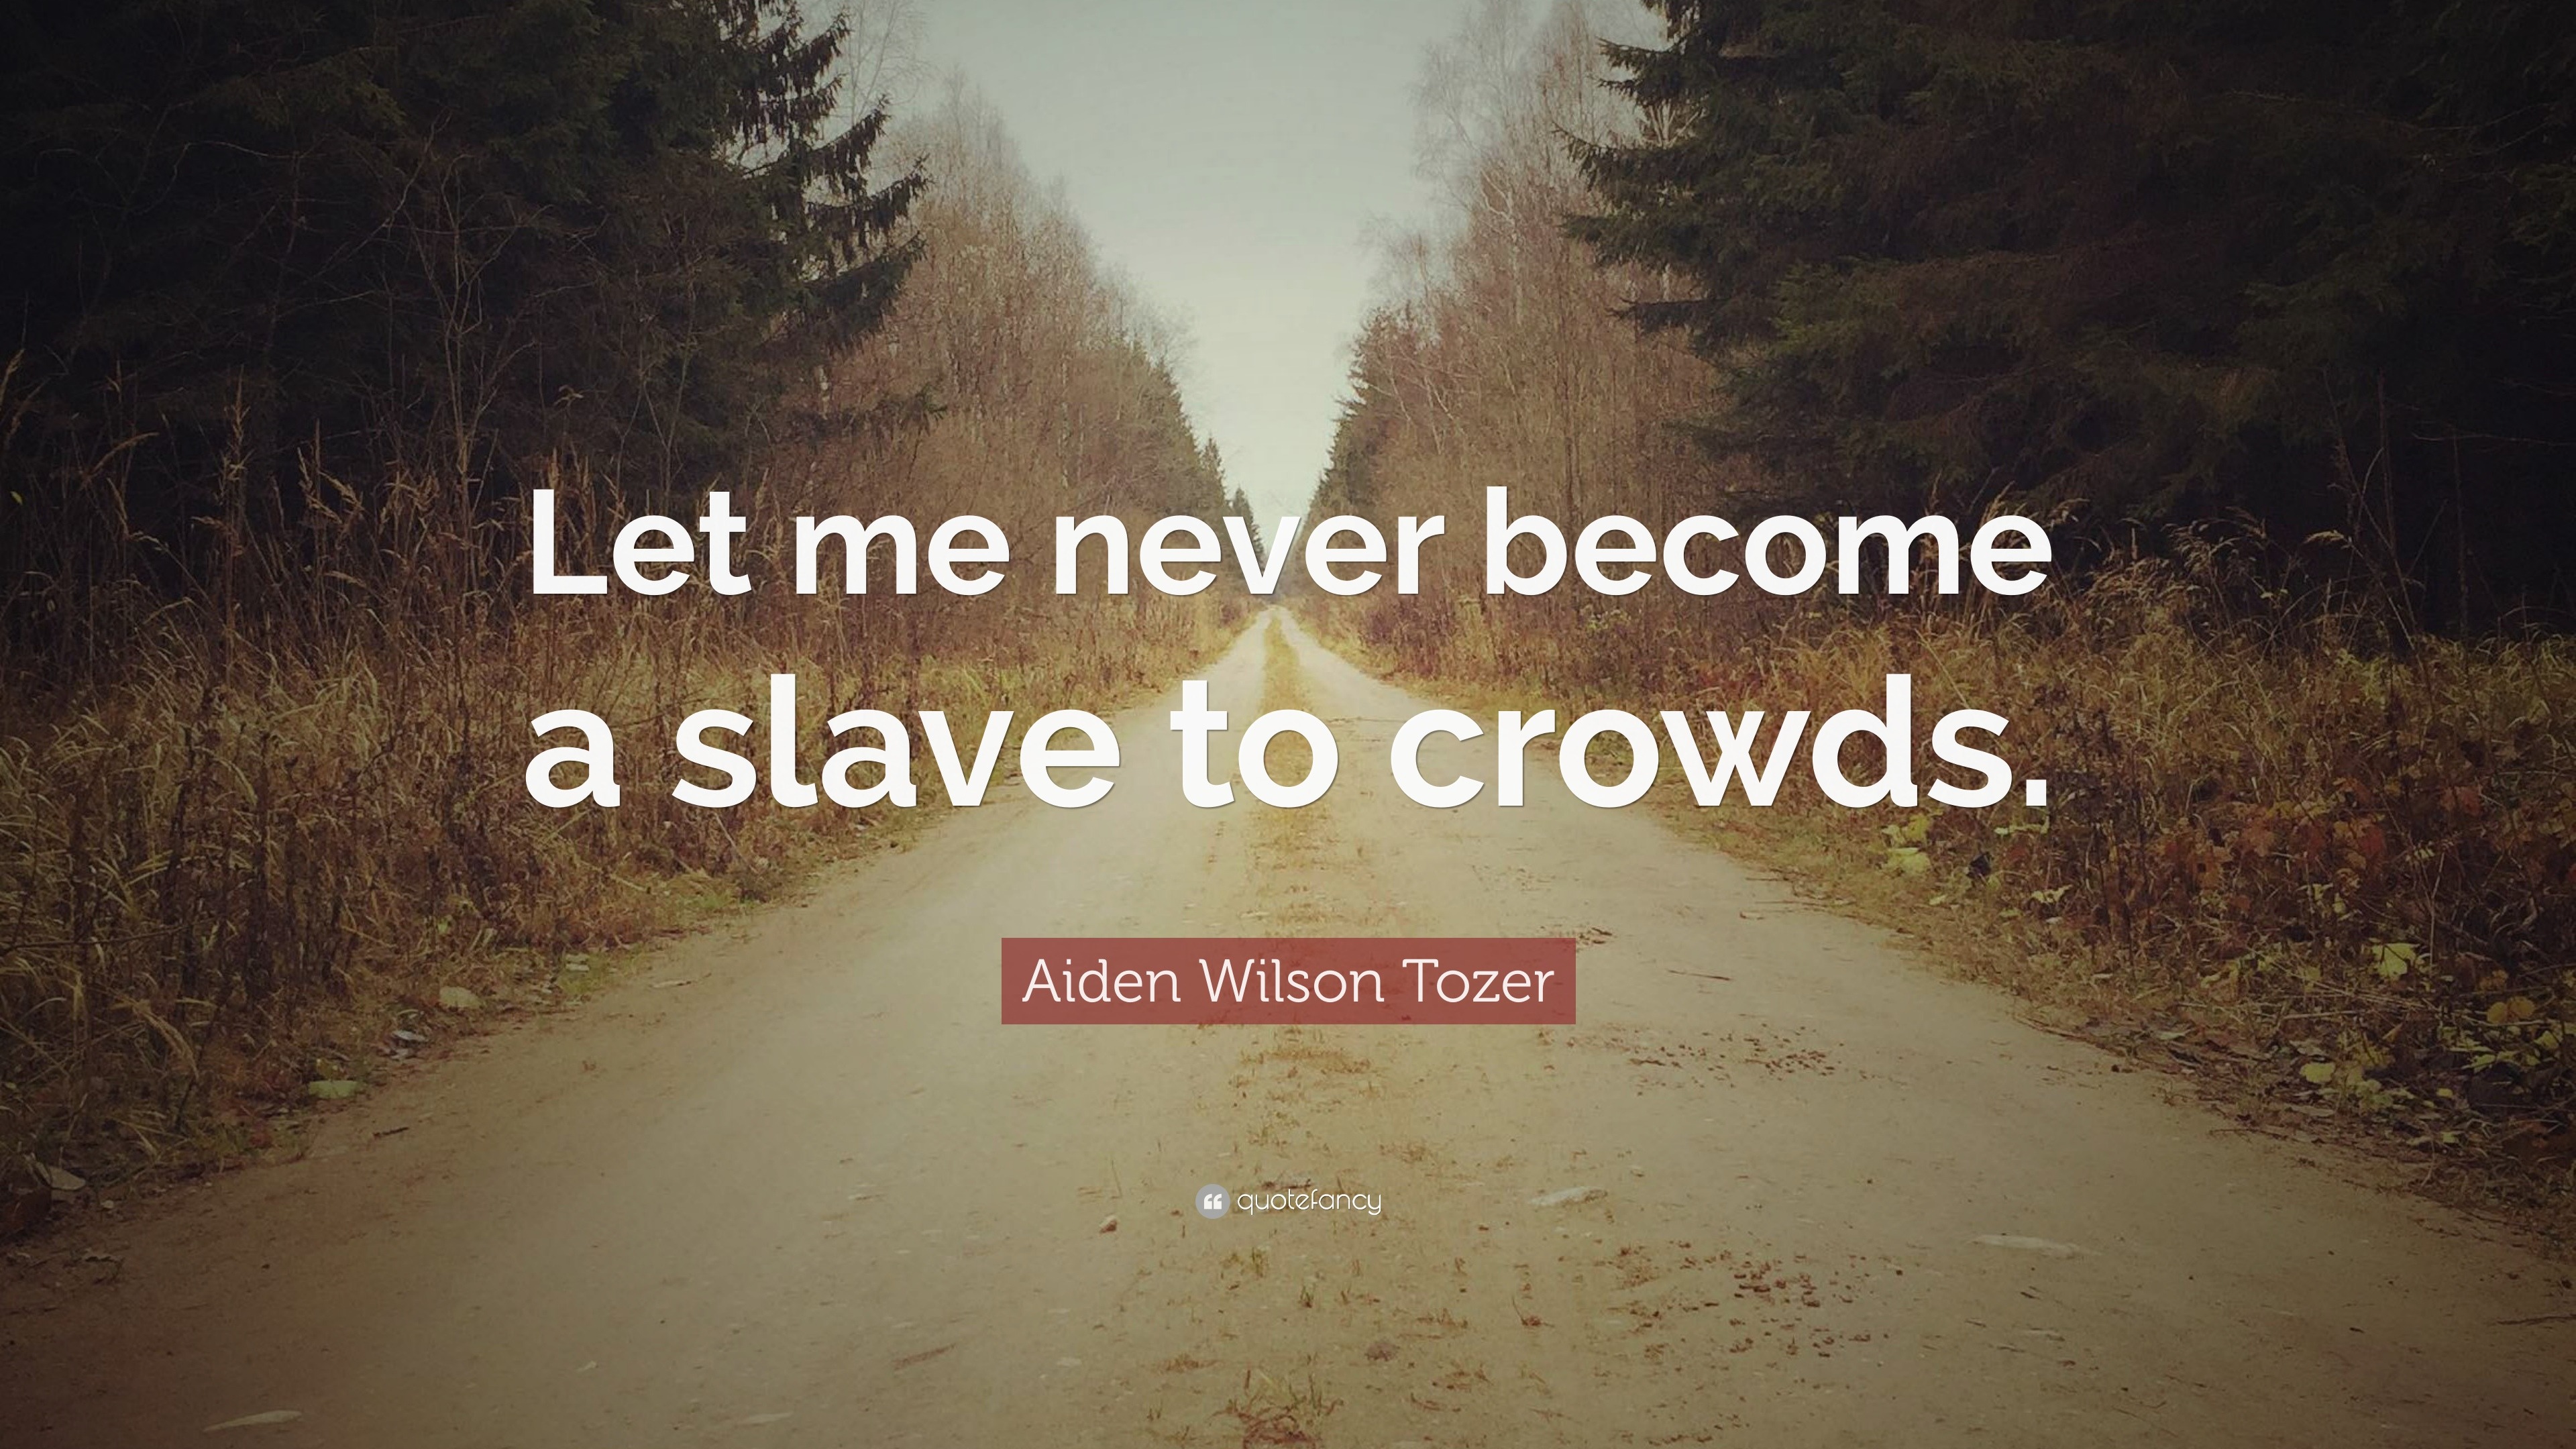 Aiden Wilson Tozer Quote: “Let me never become a slave to crowds.”